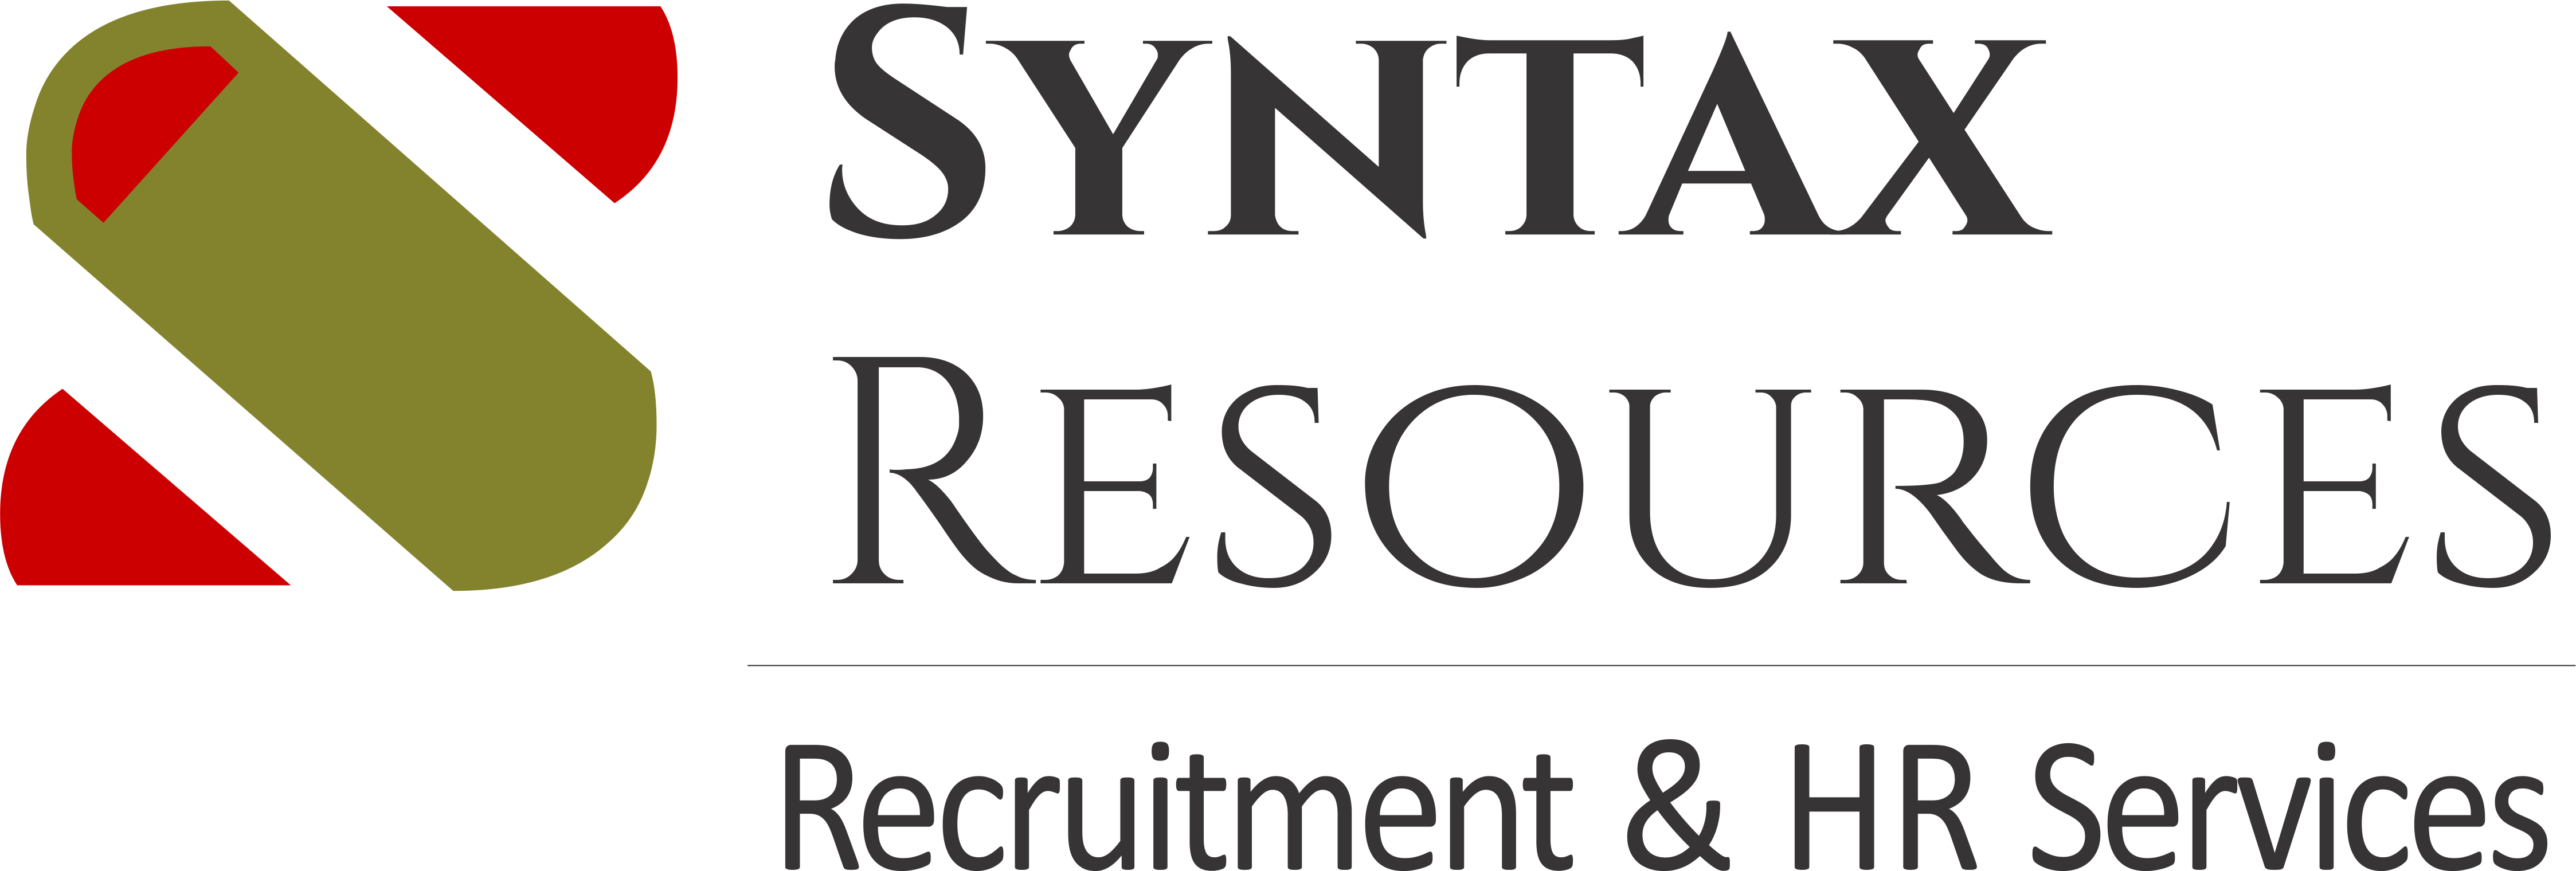 https://www.pakpositions.com/company/syntax-resources-a-recruitment-and-training-firm